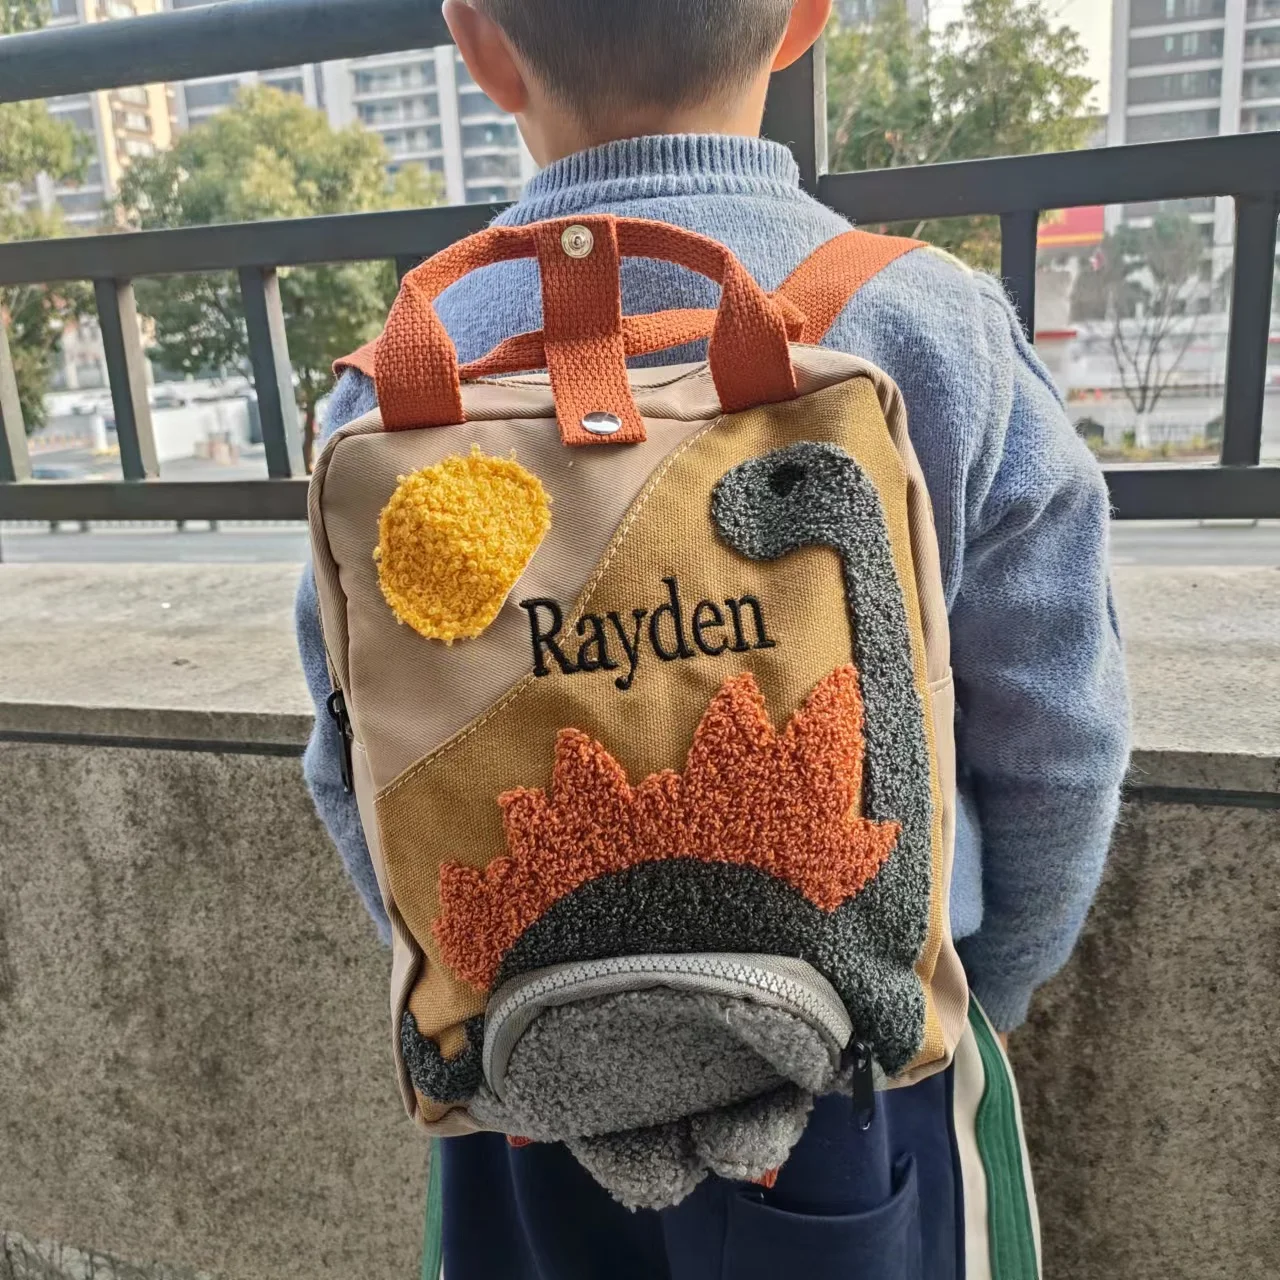 

Canvas Cute Cartoon Dinosaur Kindergarten Embroidered Name Small Animal Shaped Boys Girls Backpack Personalized Kids Schoolbags